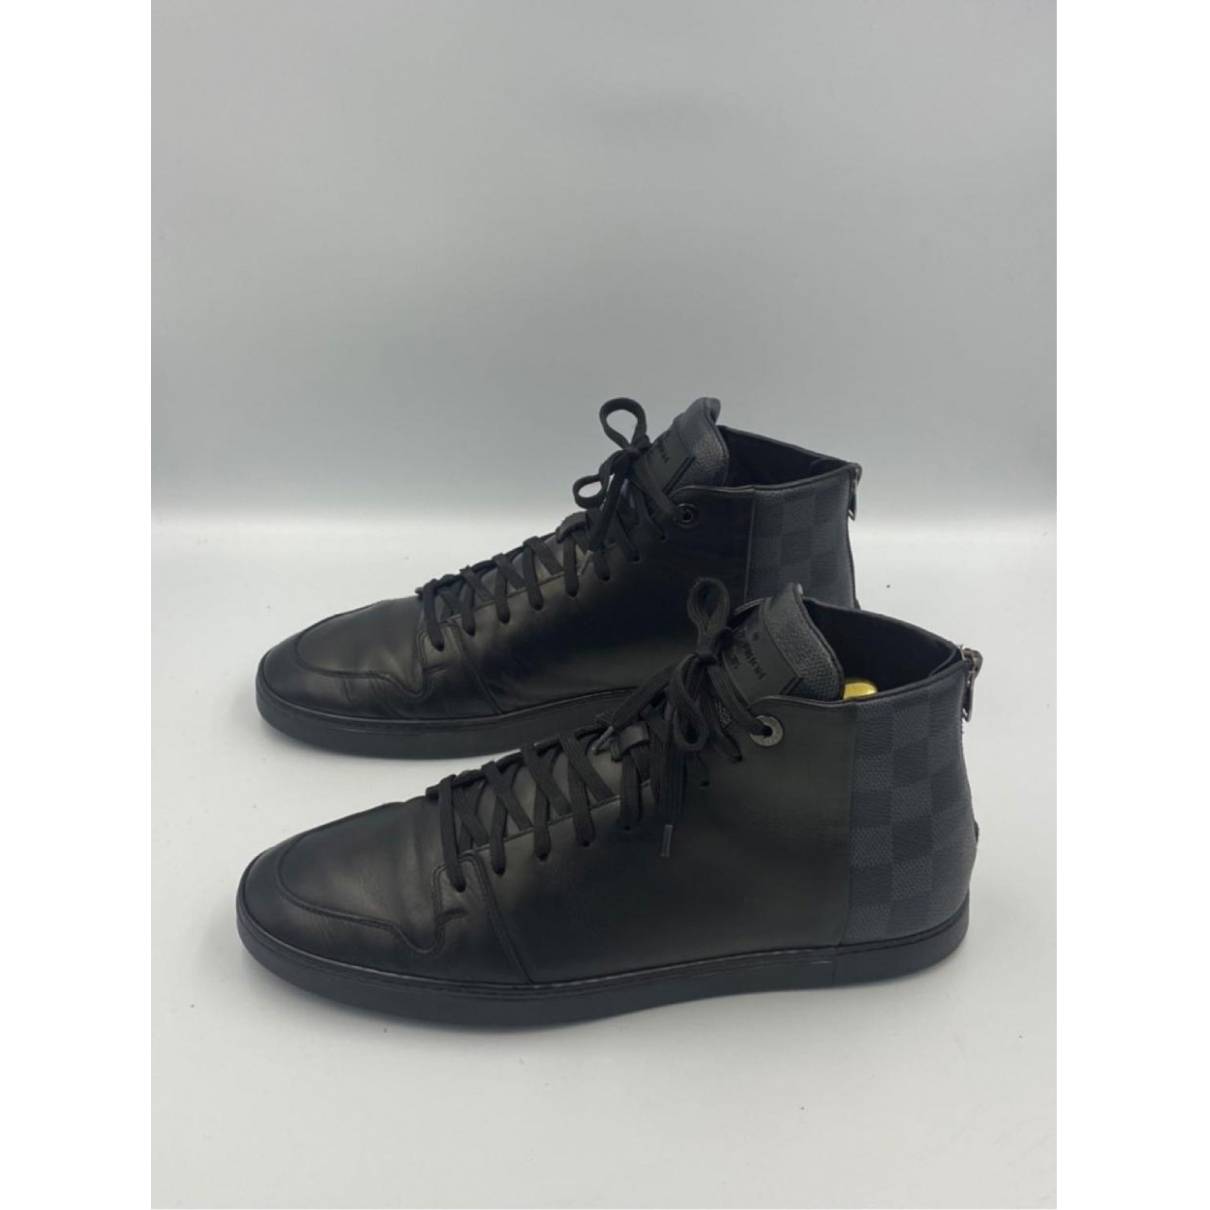 Louis Vuitton LV Trainer Sneaker Boot High Black Sz UK 9.5 New With Box  RARE